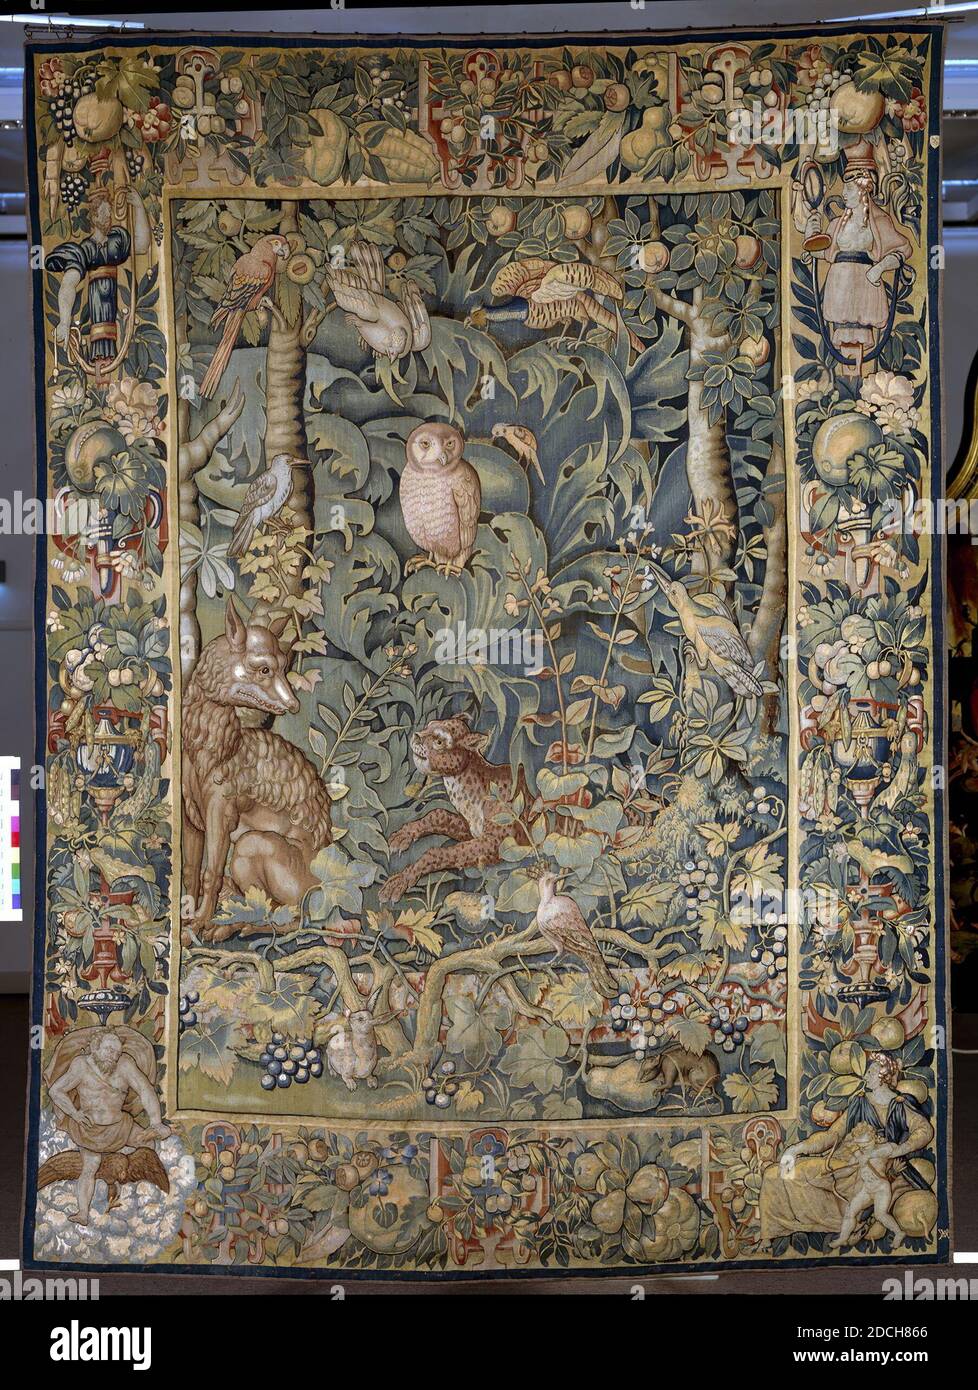 tapestry, Willem Andriesz. de Raedt, 1550 - 1558, woven, General: 312.5 x 231.5cm, cat, allegory, fox, rabbit, owl, cupid, venus, wolf, jupiter, lead, Painted room paneling with double doors, room paneling with one door and a mantelpiece, part of an 18th century interior. The paneling is made up of panels placed in frames which are provided with simple wood carvings. The compartments in both the single and double door paneling are lined with a modern yellow fabric. The chimney piece is also provided with rich wood carvings. The mantelpiece is made of gray marble, with a cut frame for a mantel Stock Photo